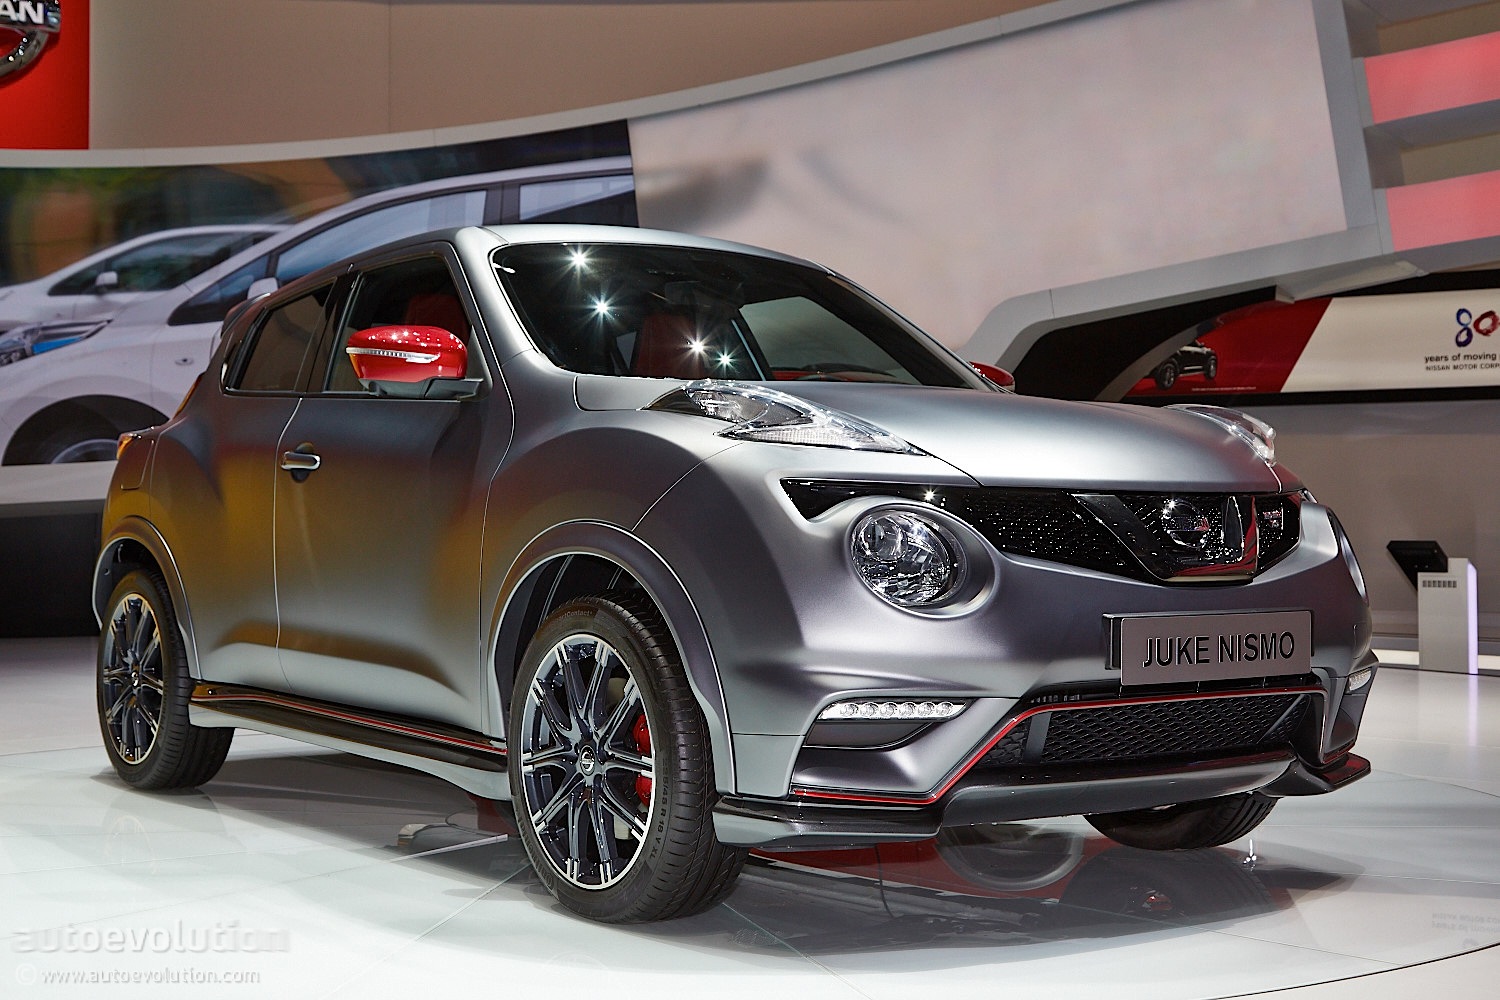 Nissan Juke Nismo Rs Facelift Debuts In Geneva With 218 Hp Live Photos